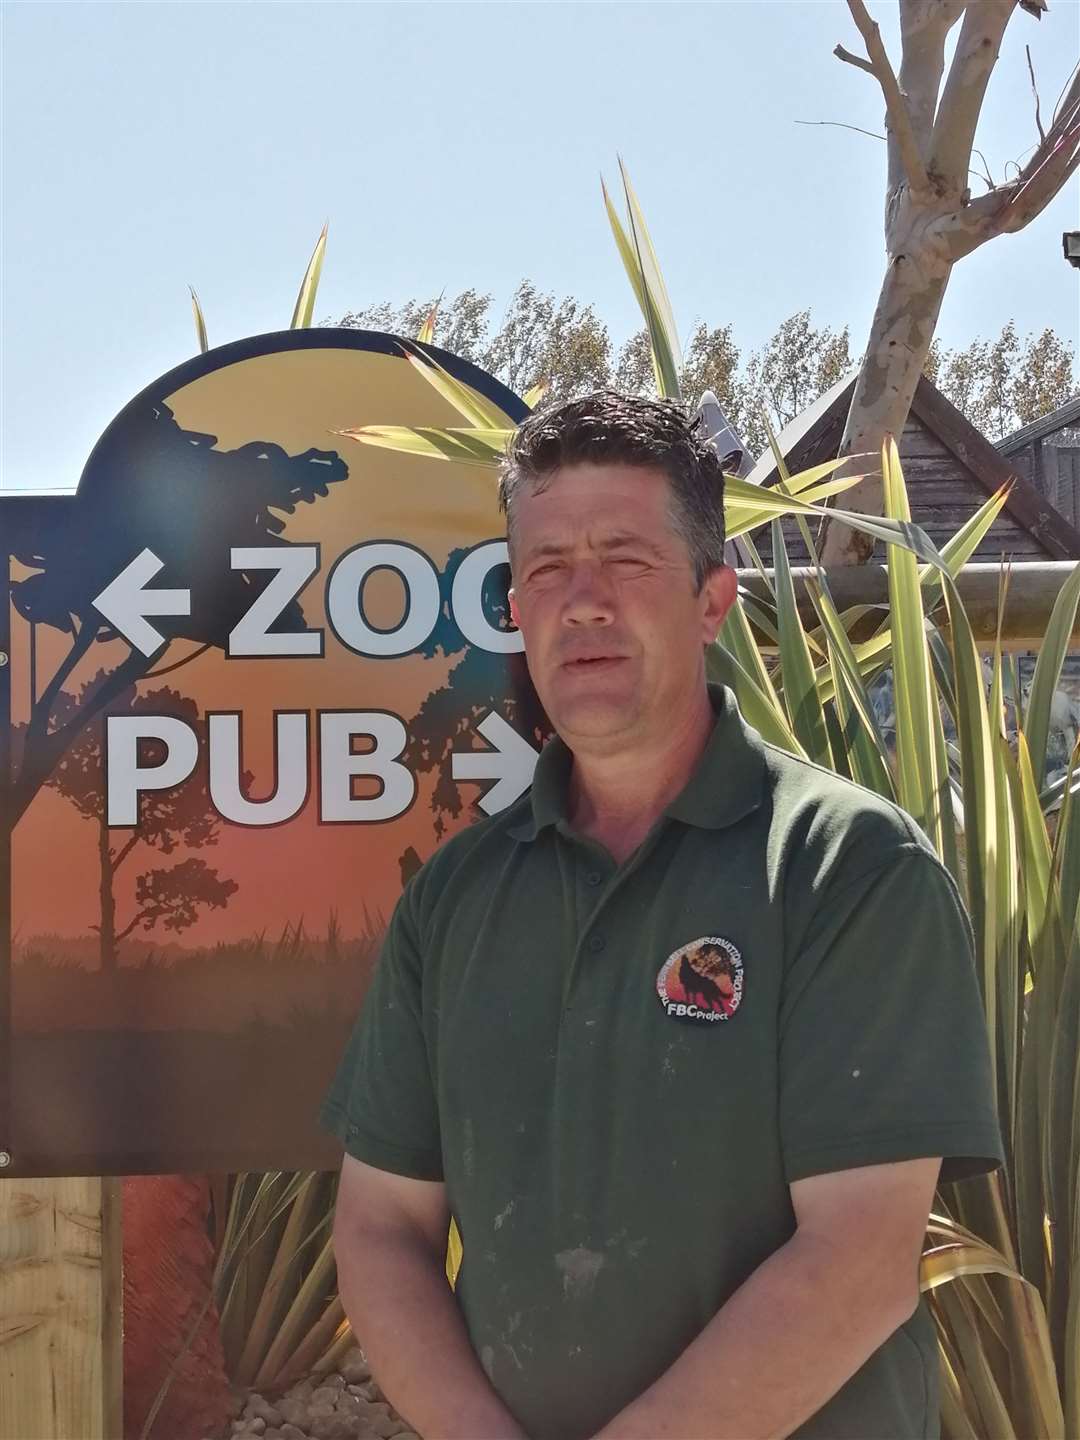 Andy Cowell, owner of The Fenn Bell Zoo and pub at St Mary Hoo, Rochester